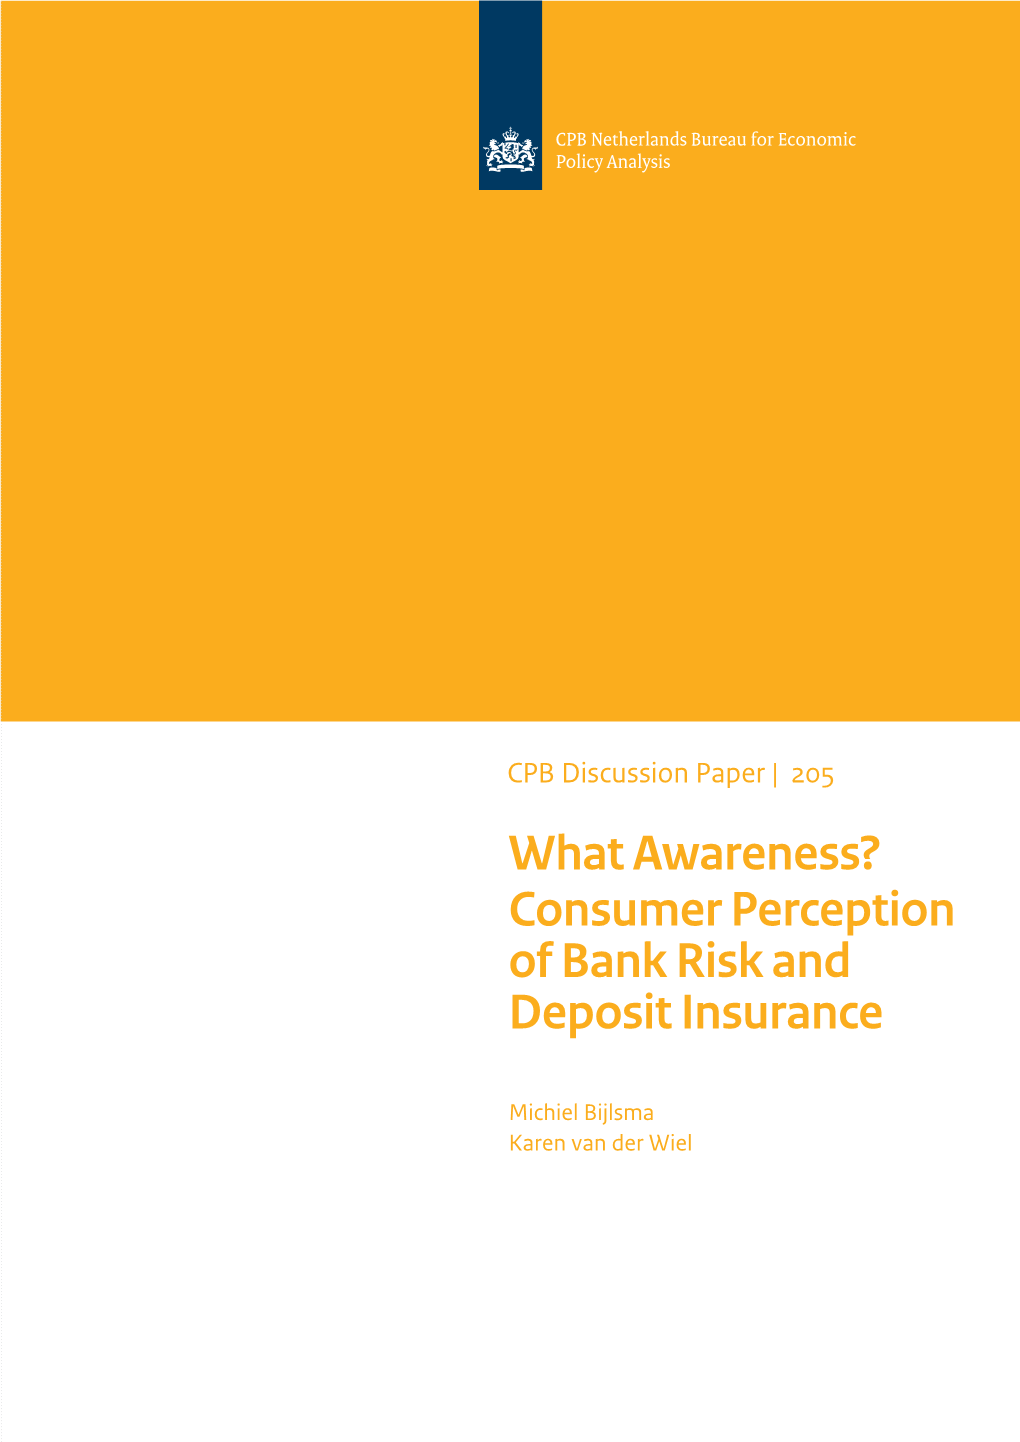 Consumer Perception of Bank Risk and Deposit Insurance